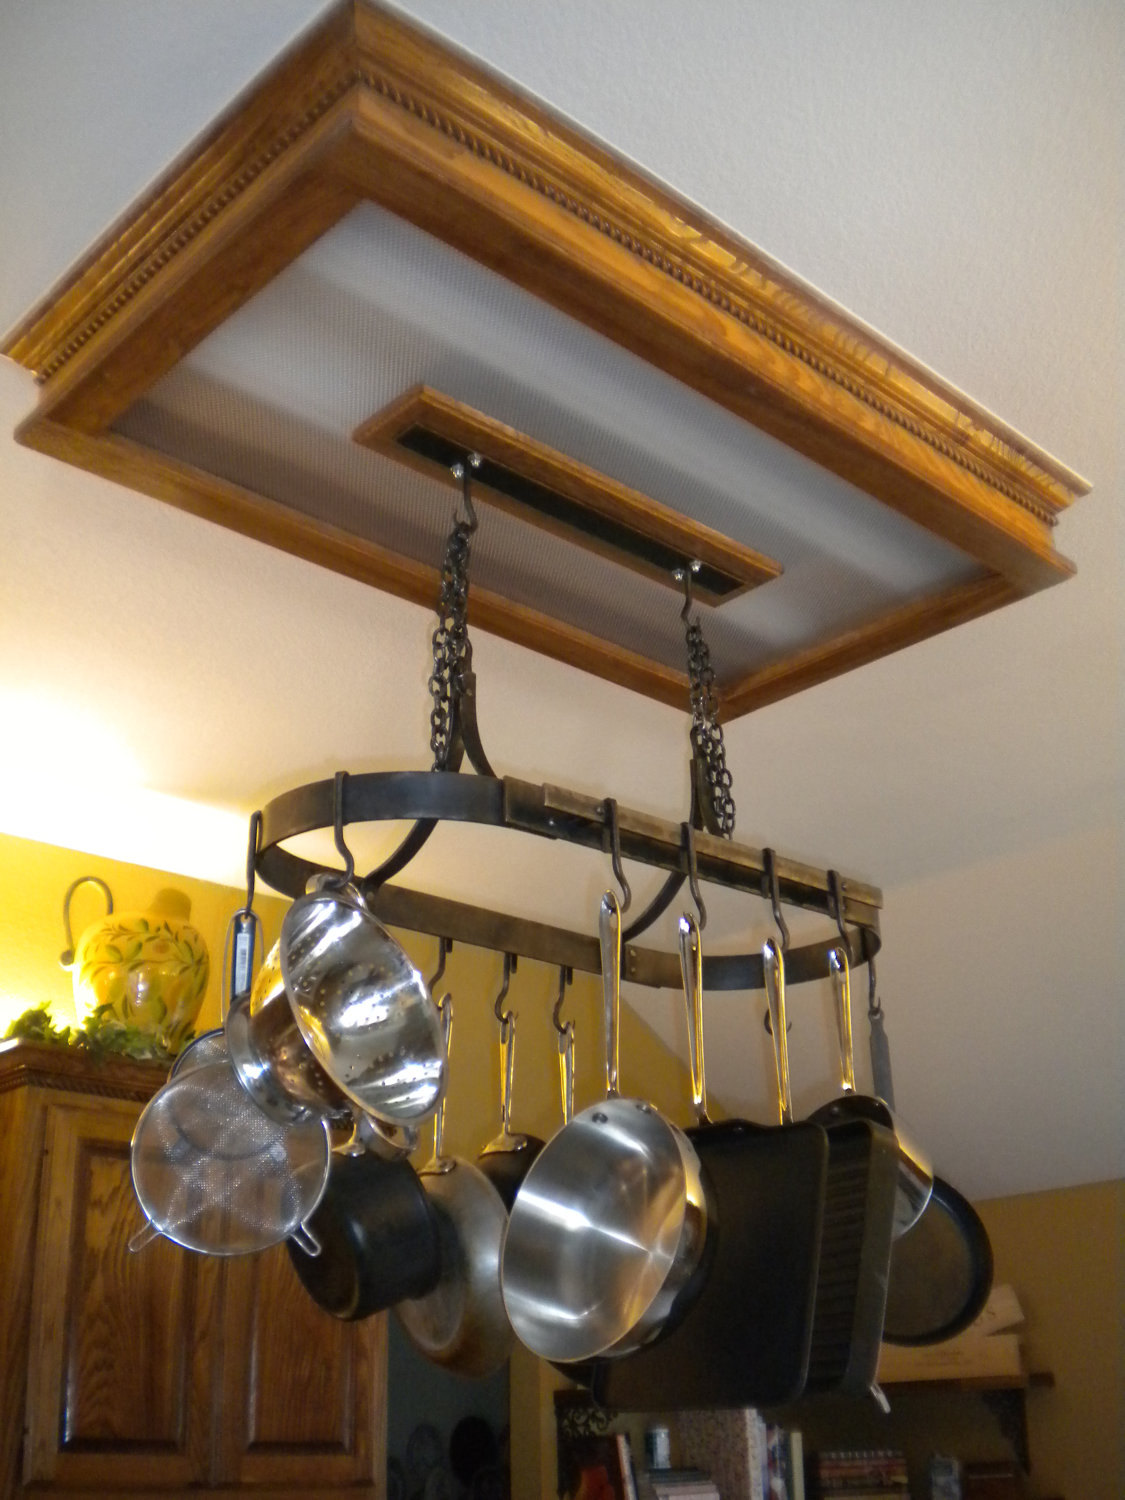 Hanging Iron Pot Rack With 10 Hooks Hand Forged By A Blacksmith Artisans Of The Anvil